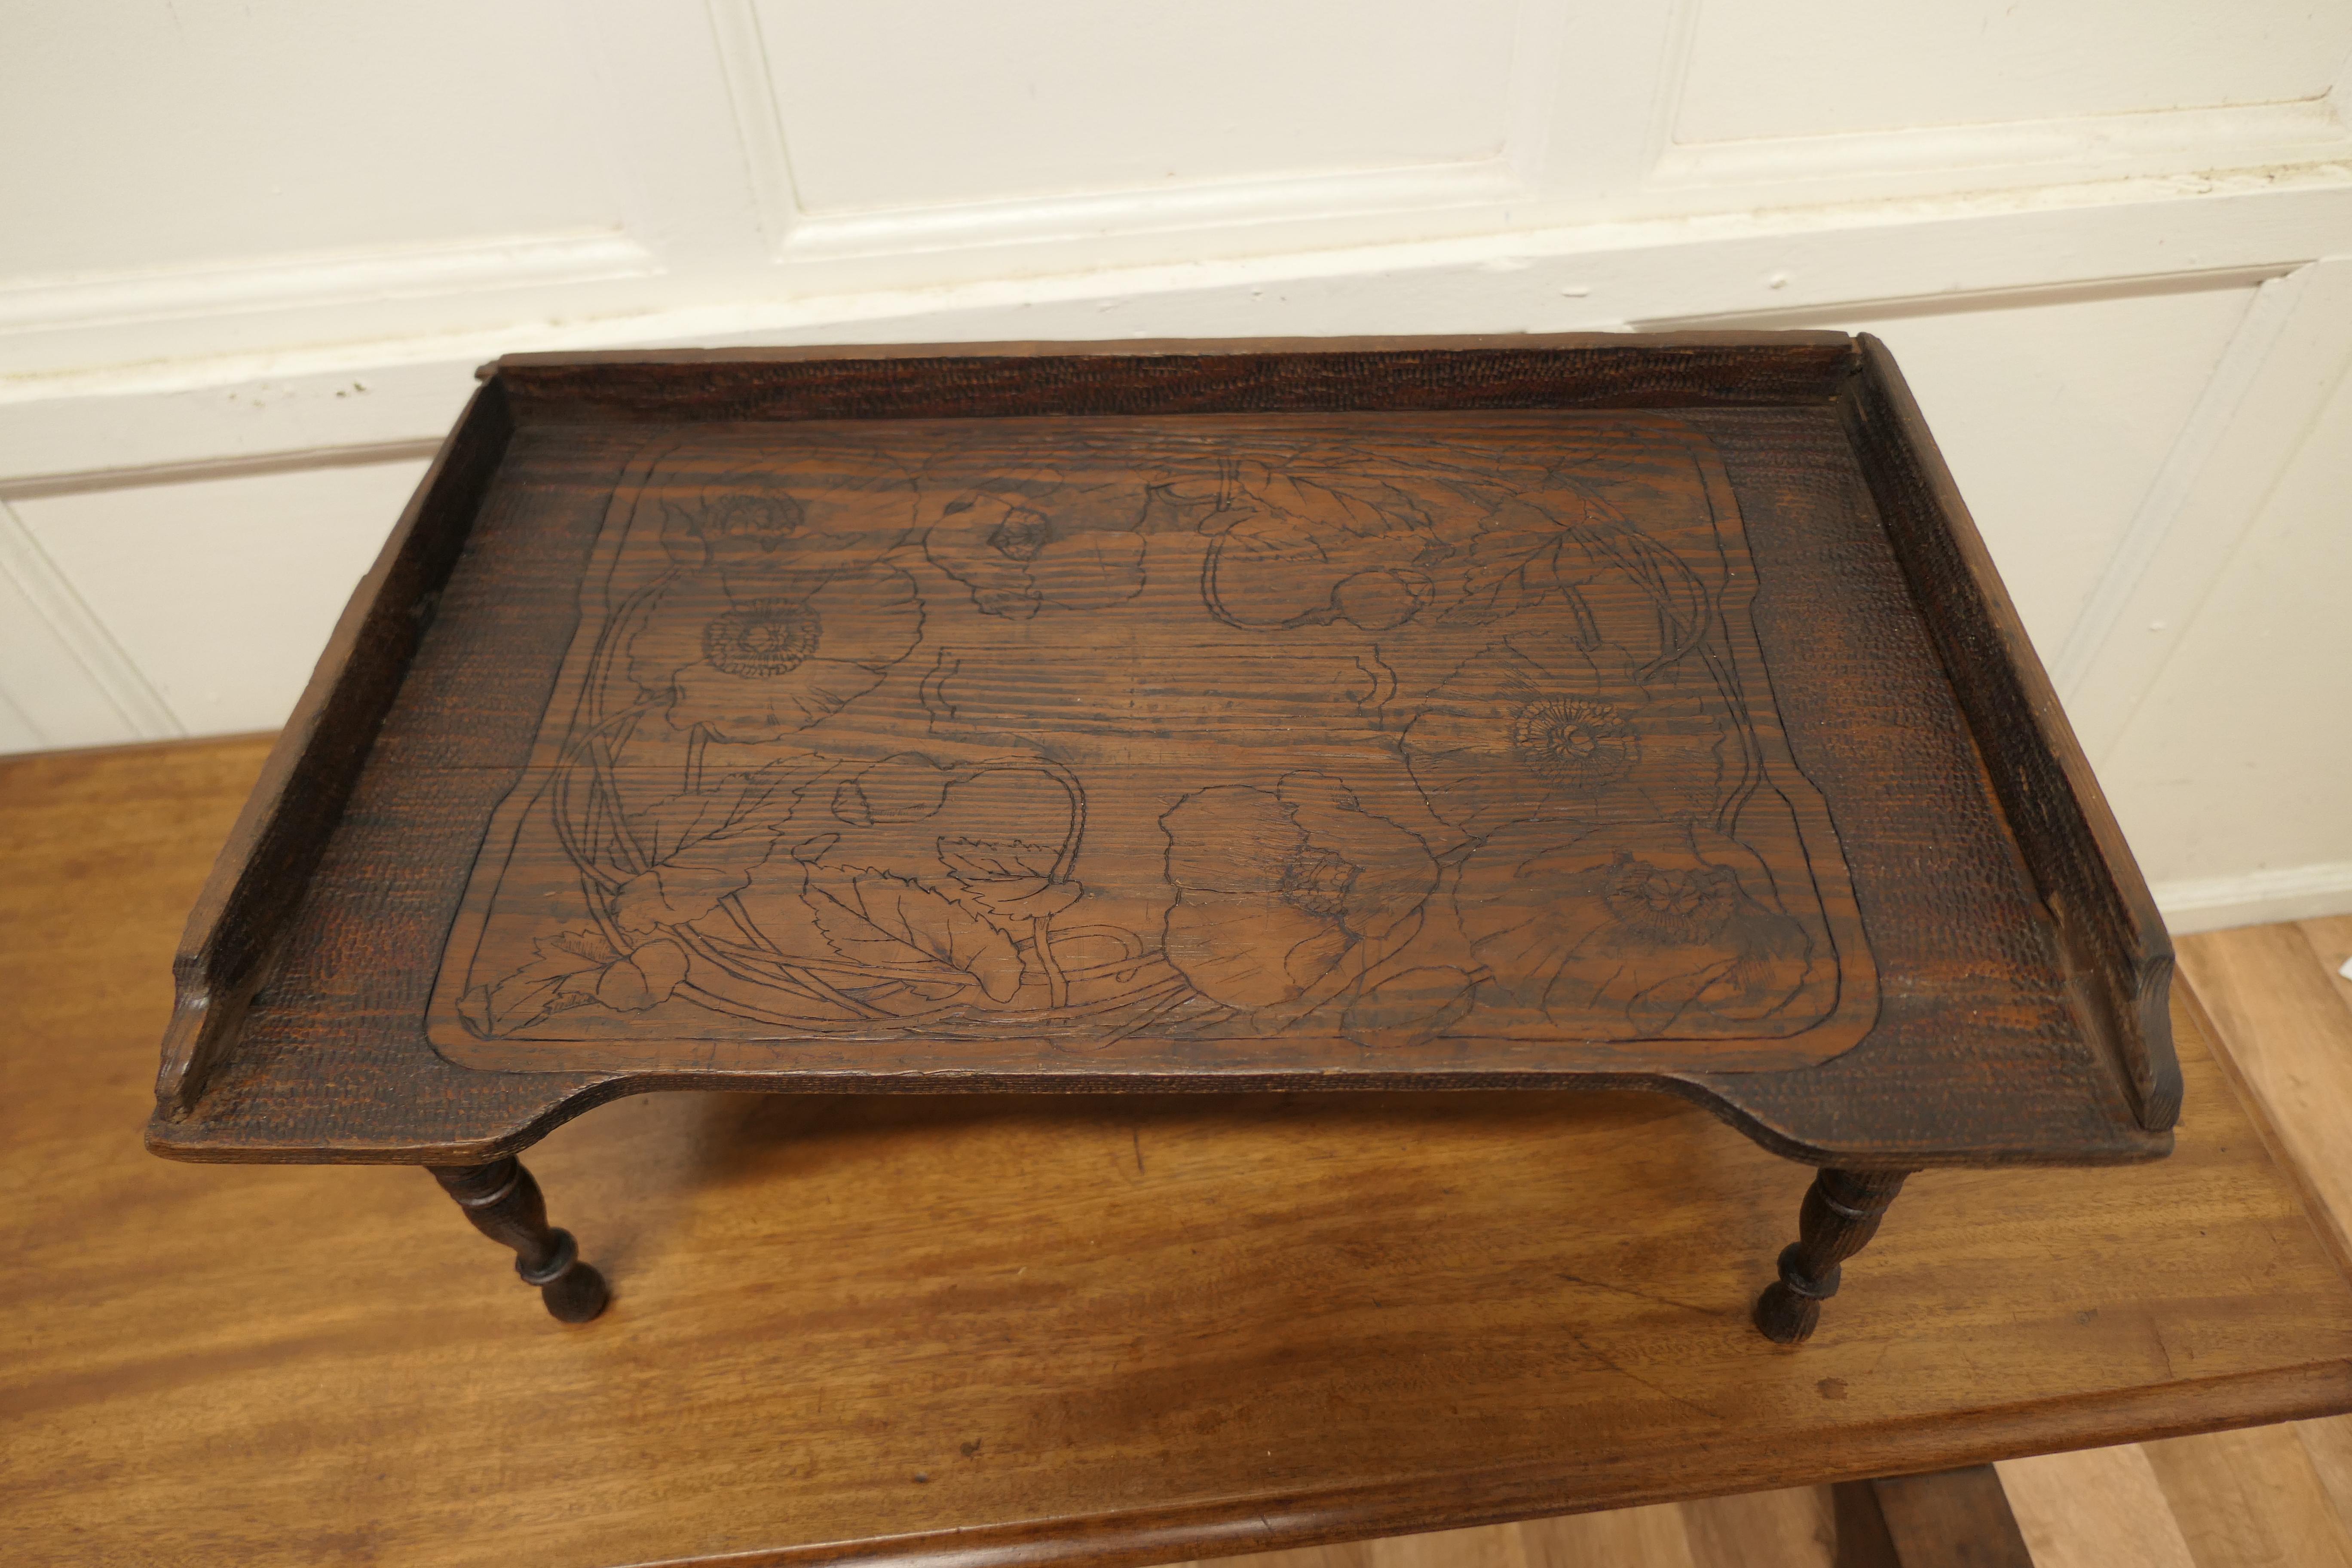 Carved pine breakfast bed tray table. 

This is a good Country Piece, it has a scratch carved decoration on the top.
It is a bed tray with foldaway legs which fold under and are held and released by a wooden spring.
Perfect for breakfast in bed